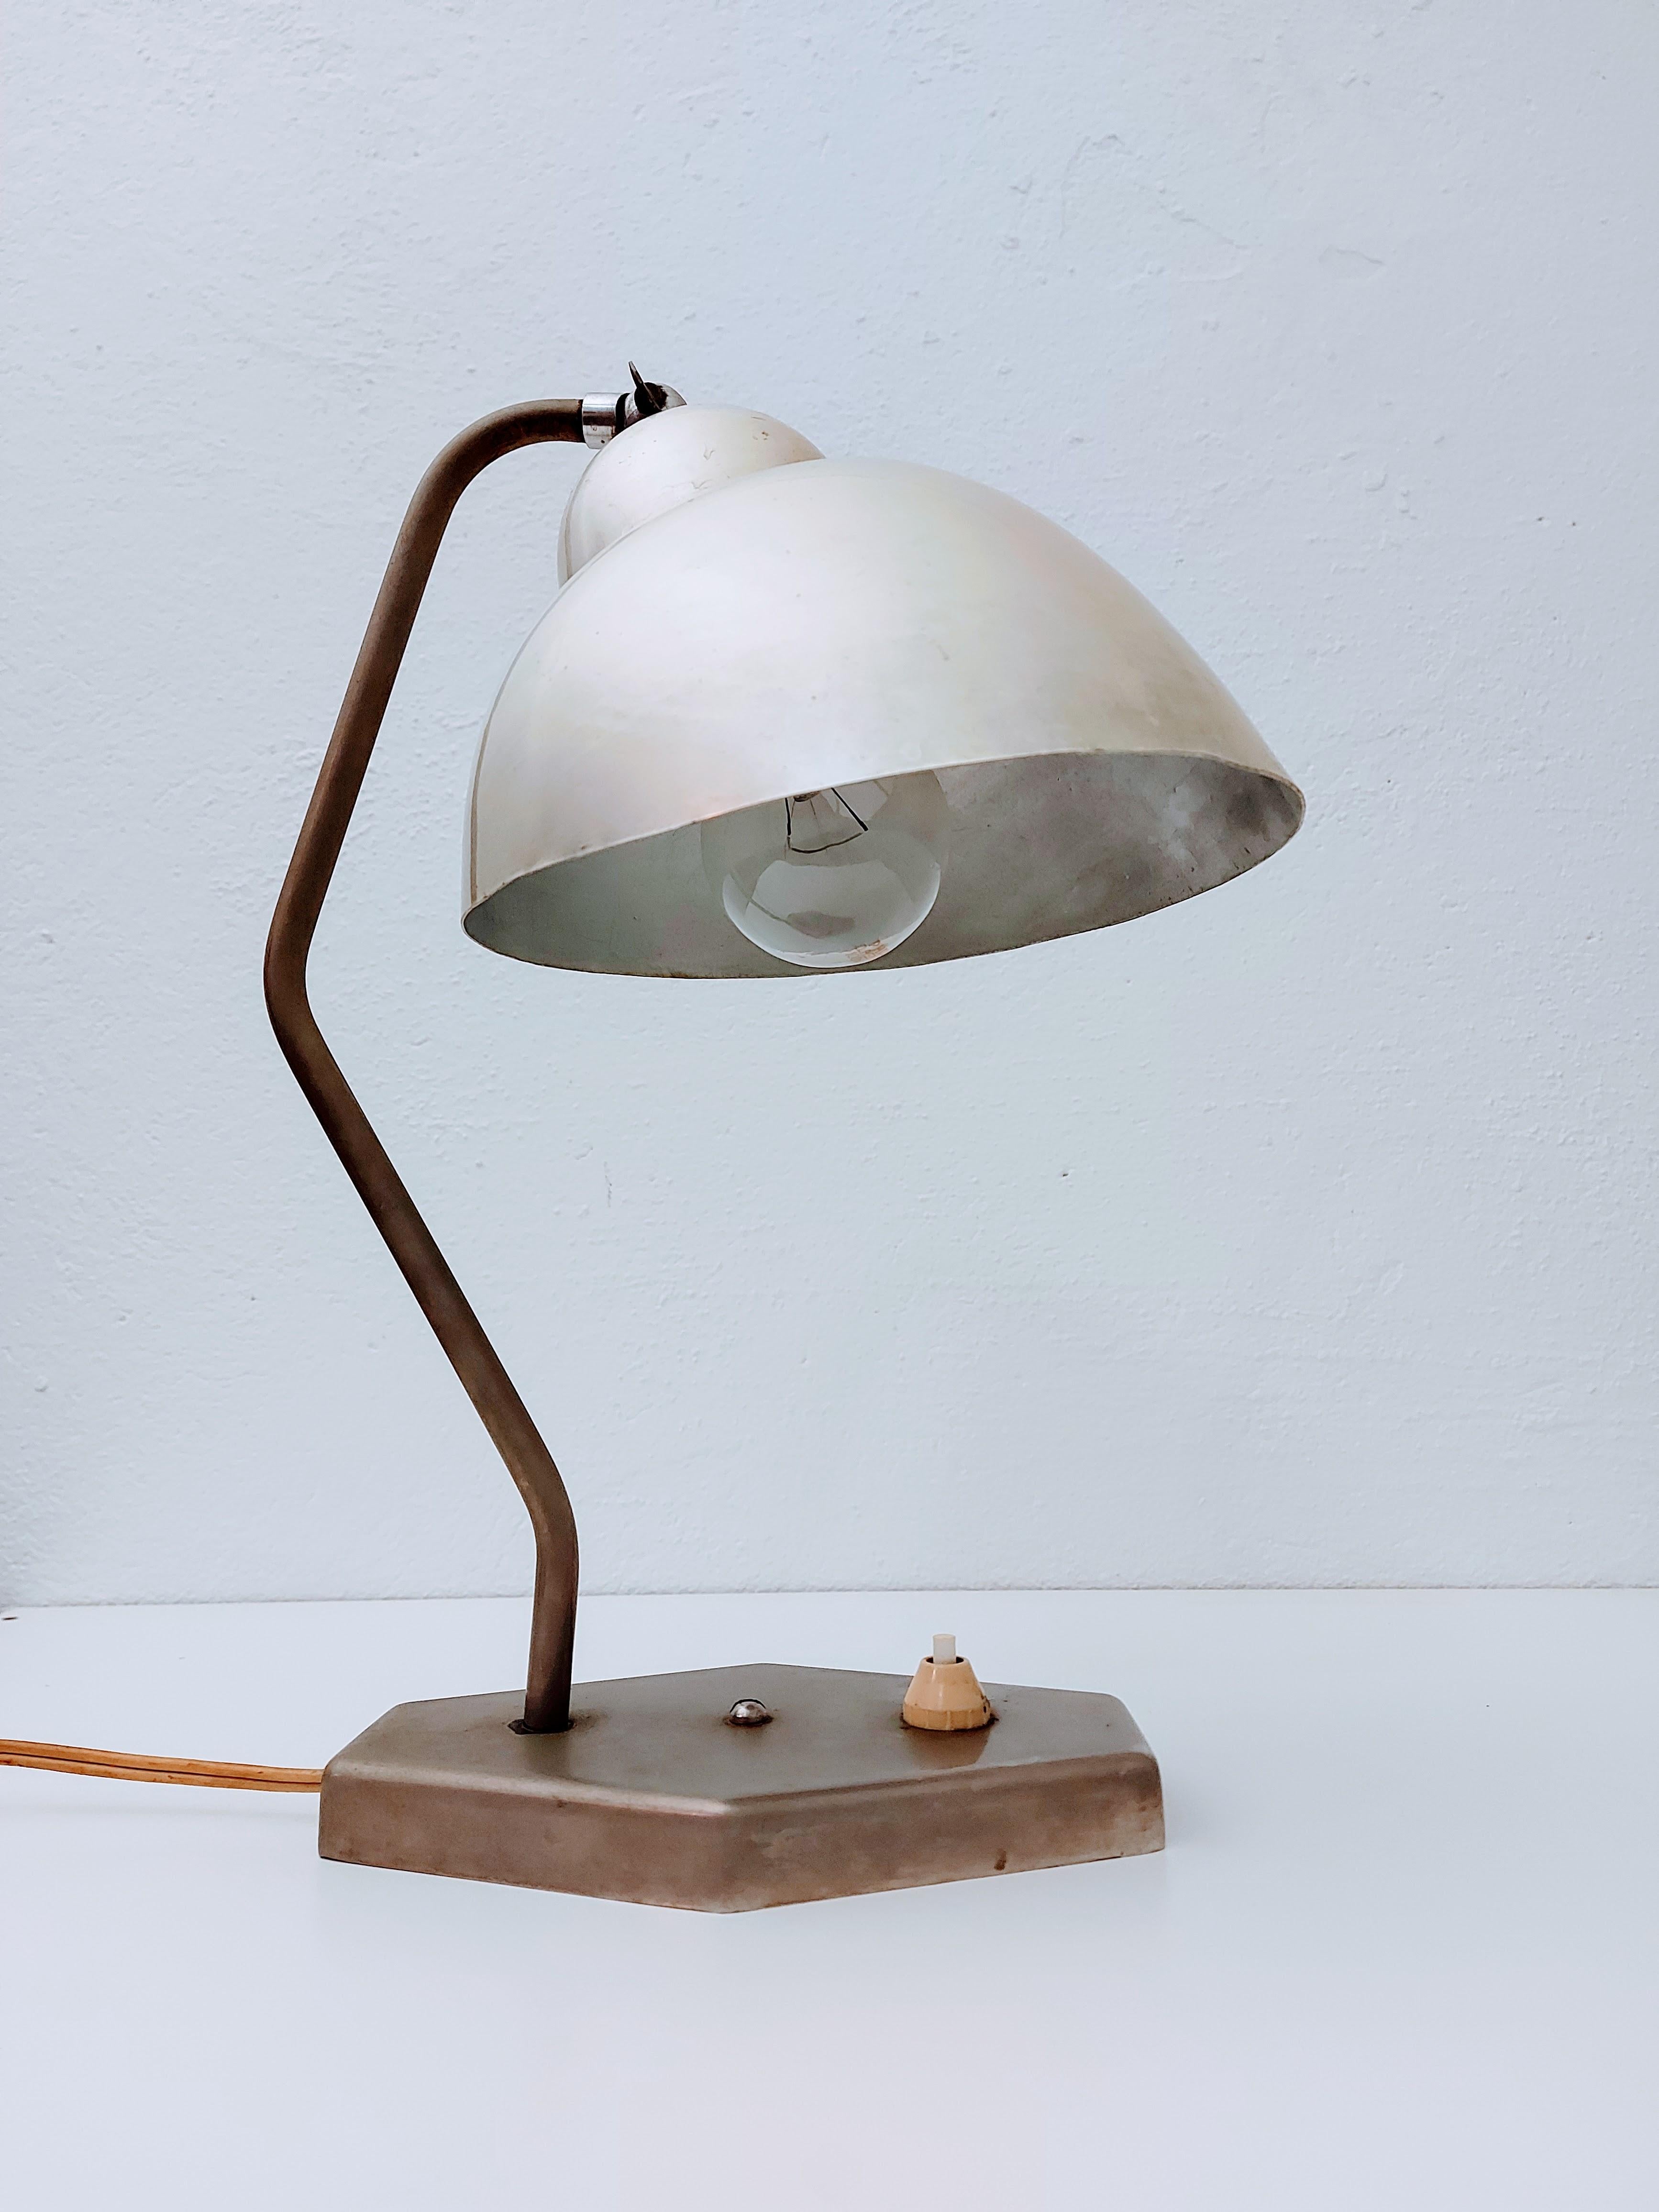 Table lamp
Period: 1950s
Materials: Metal
Colour: pearl white
Condition: Great vintage condition
Shade changes colors.